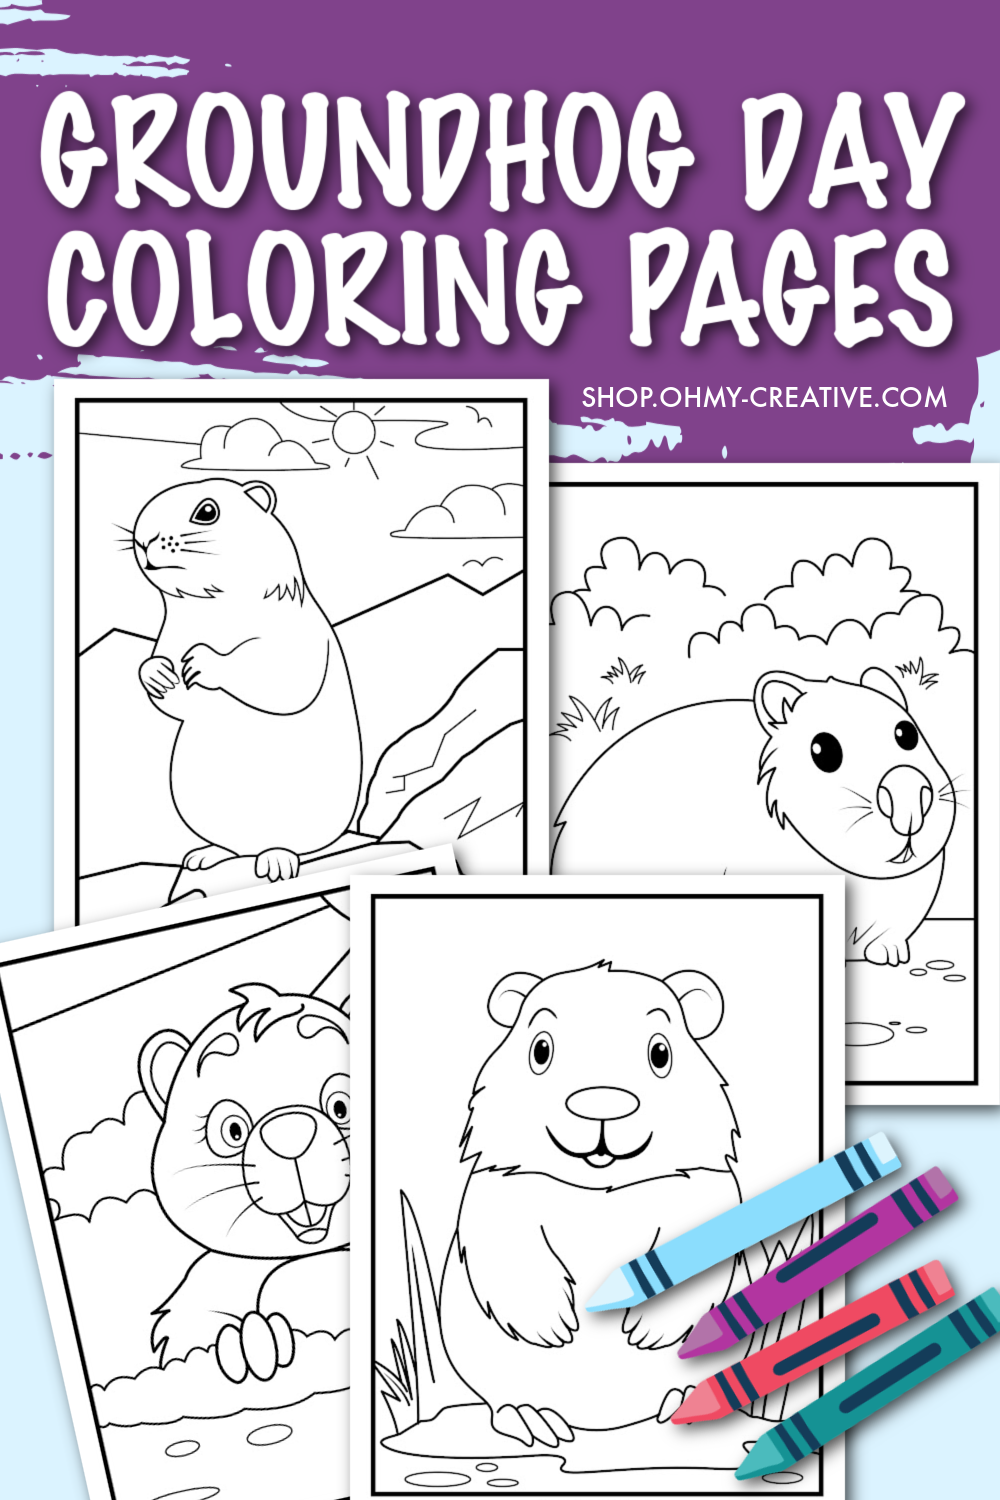 A collage of Groundhog Day coloring pages. Great for kids to color or crafts for Groundhog Day.